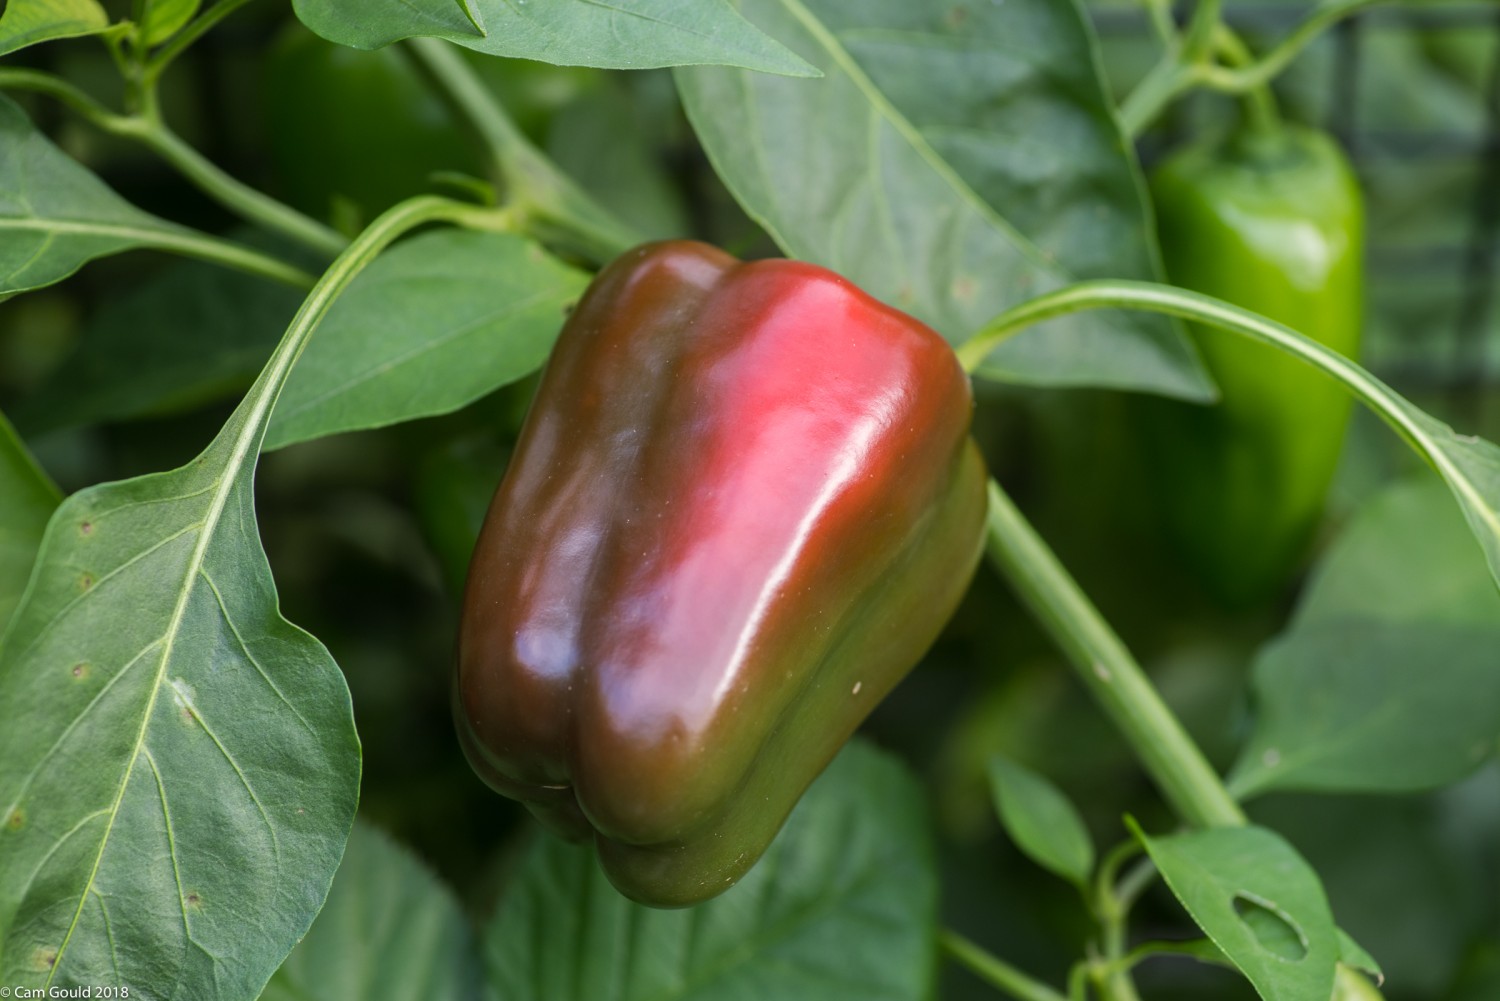 https://homefrontfarmers.com/wp-content/uploads/2018/09/hff-changing-peppers-sm.jpg